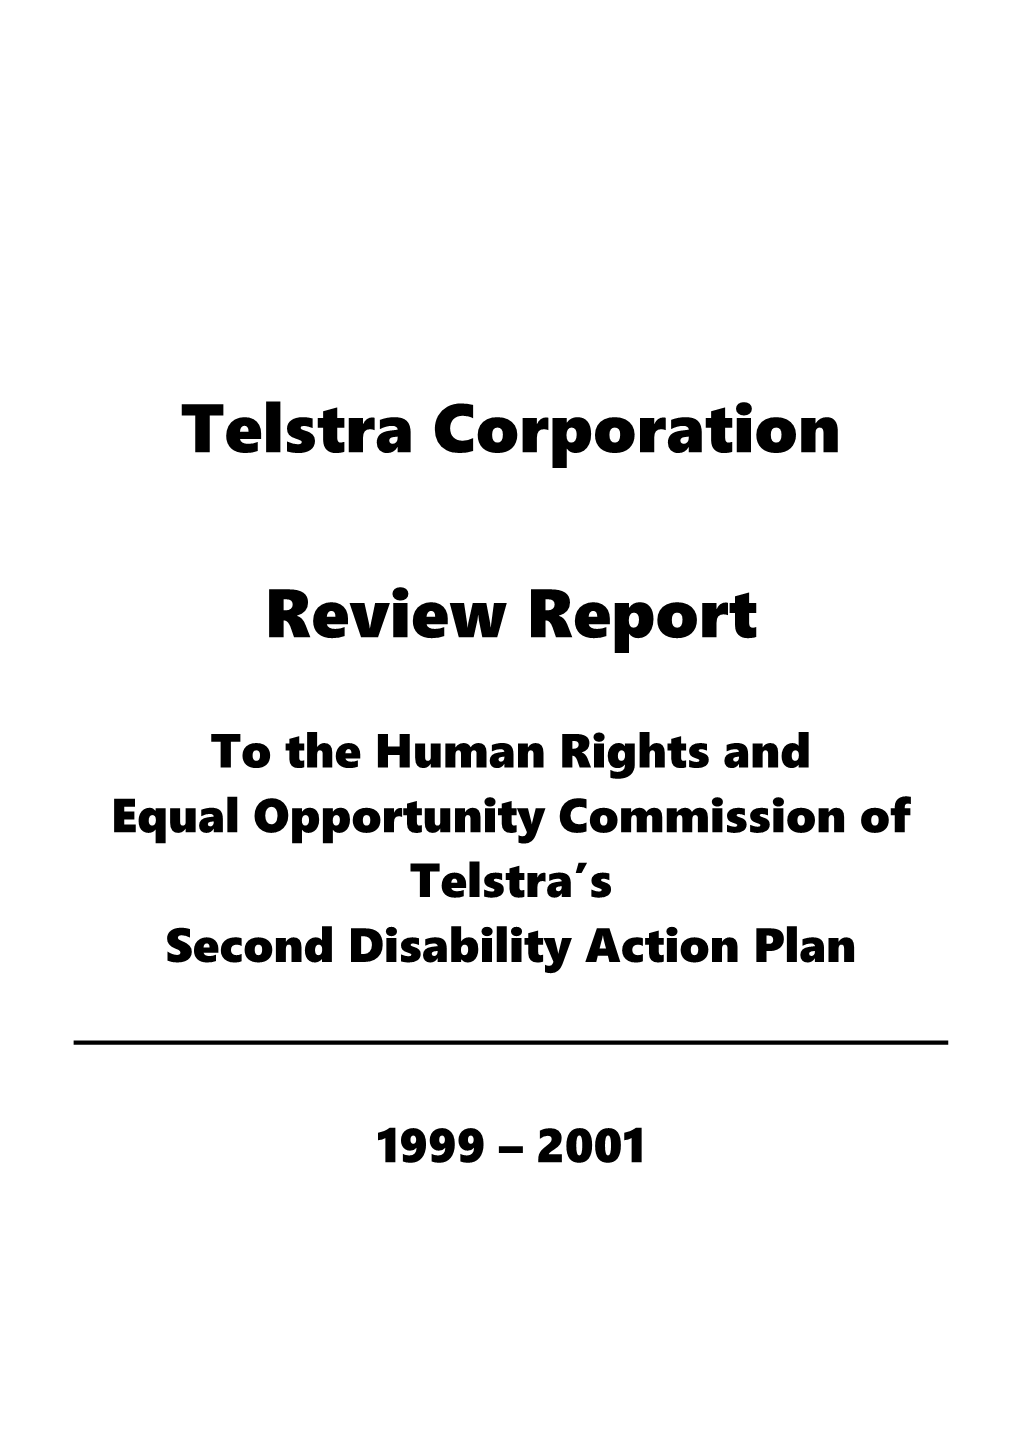 Telstra Disability - Report to the Human Rights and Equal Opportunity Commision of Telstra's